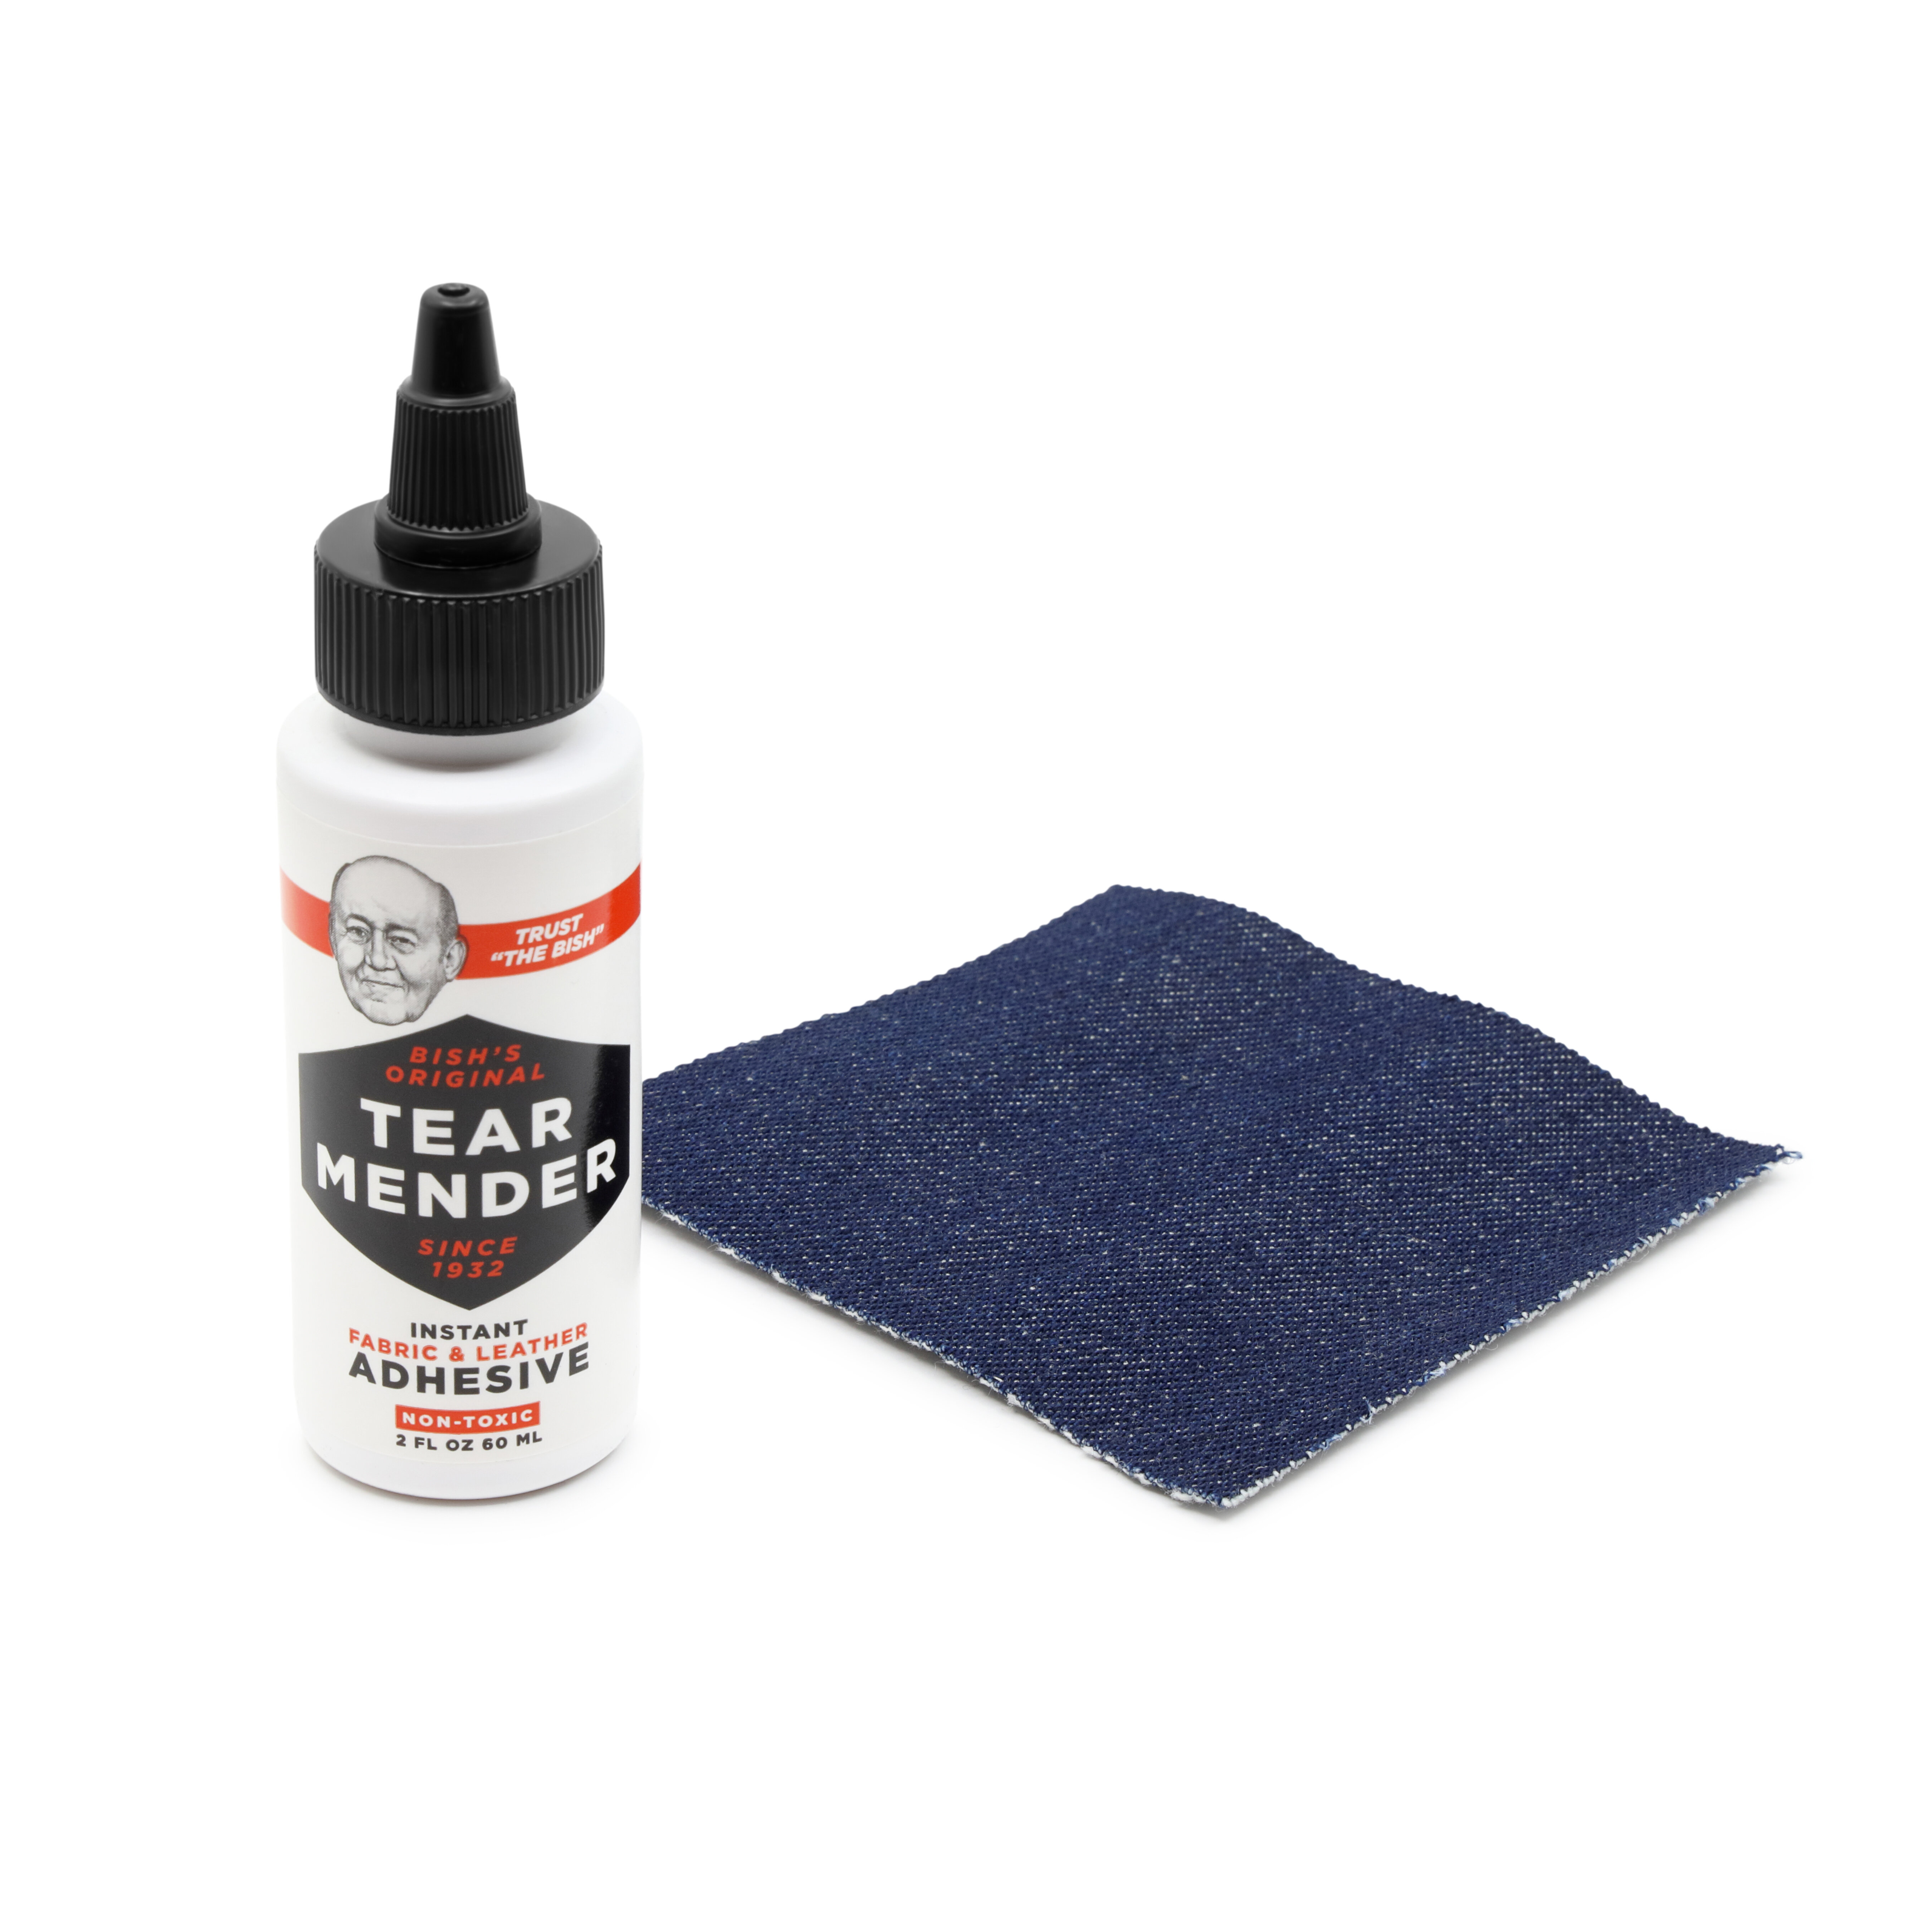 Dritz Tear Mender Outdoor, Fabric and Leather Adhesive